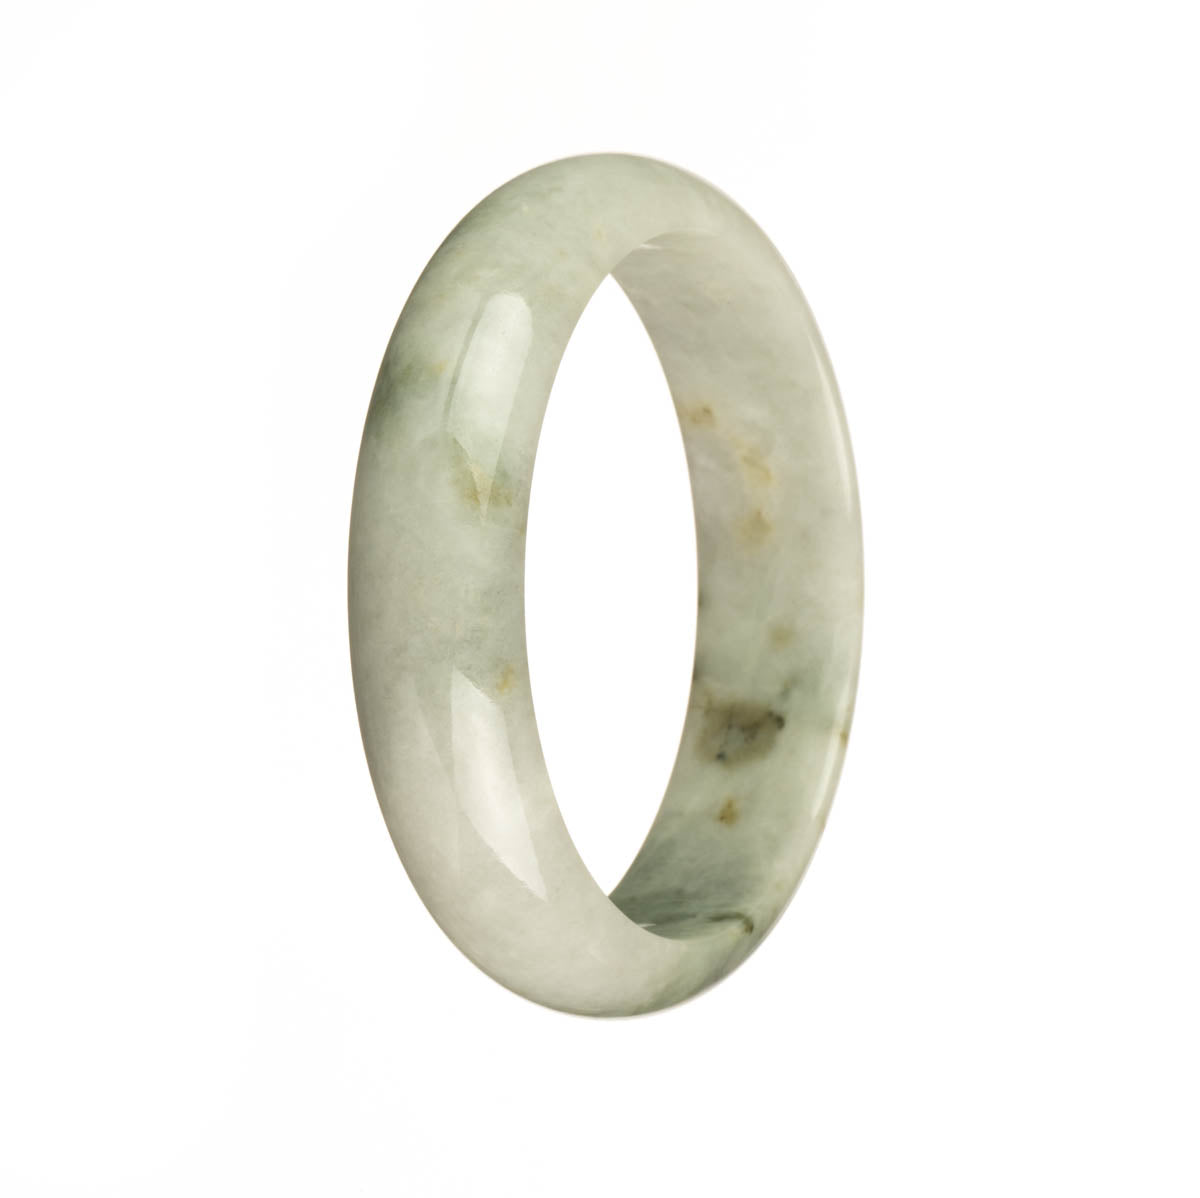 A half moon-shaped Burma Jade bracelet with a genuine Grade A white and pale green color, adorned with beautiful brown spots.